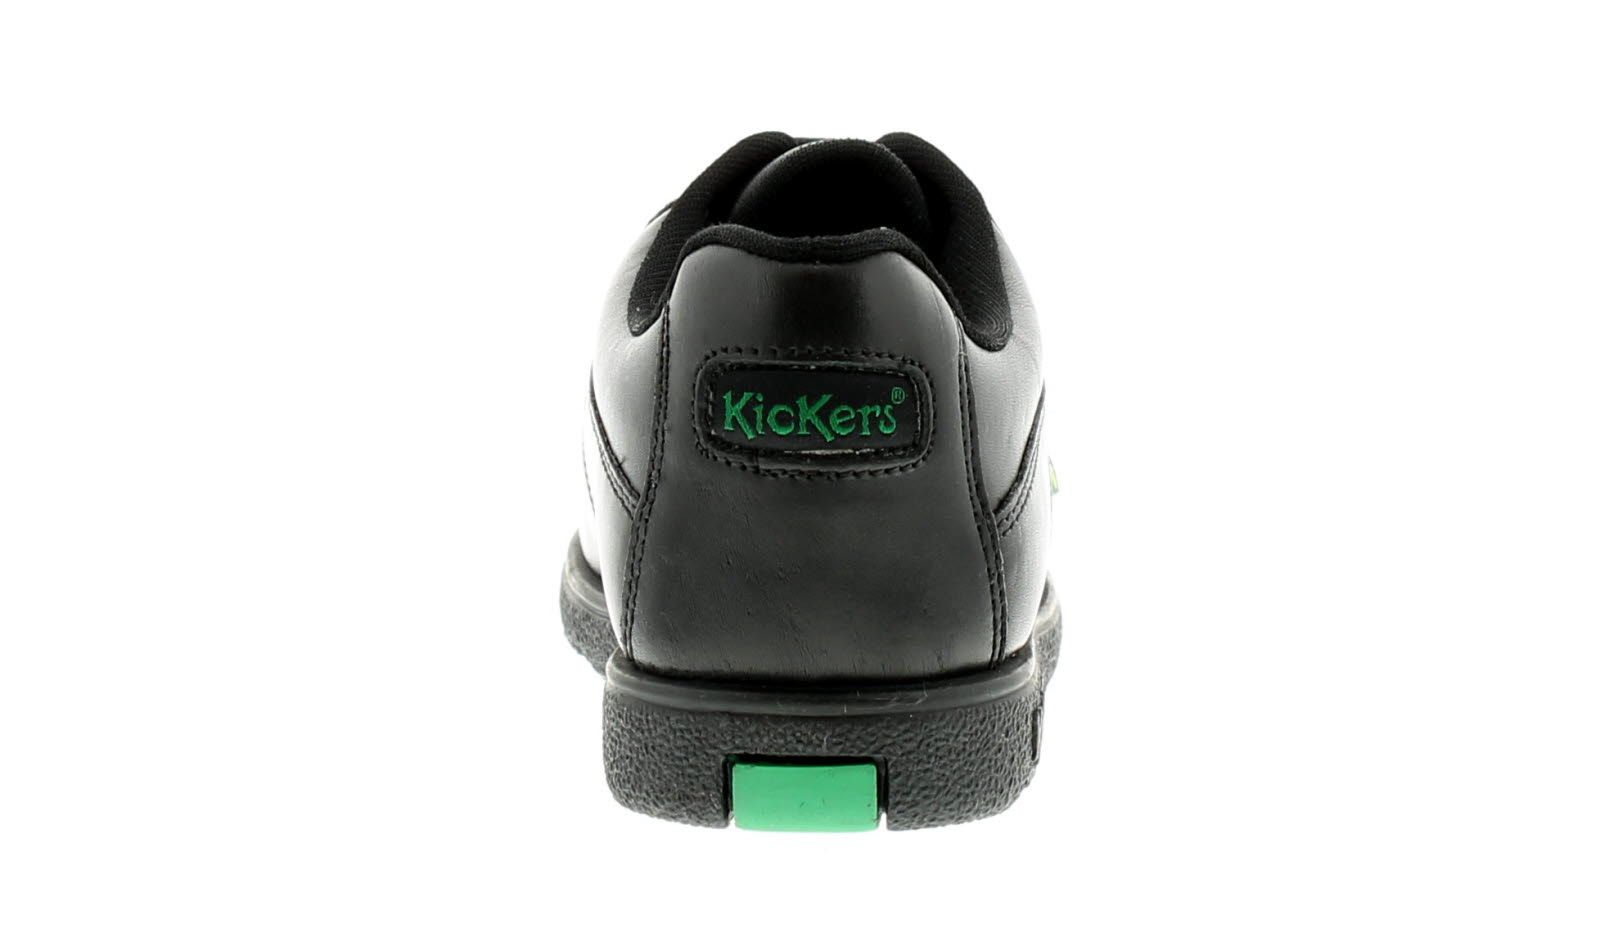 Kickers Fragma Lace 3 Junior Boys Shoes in Black